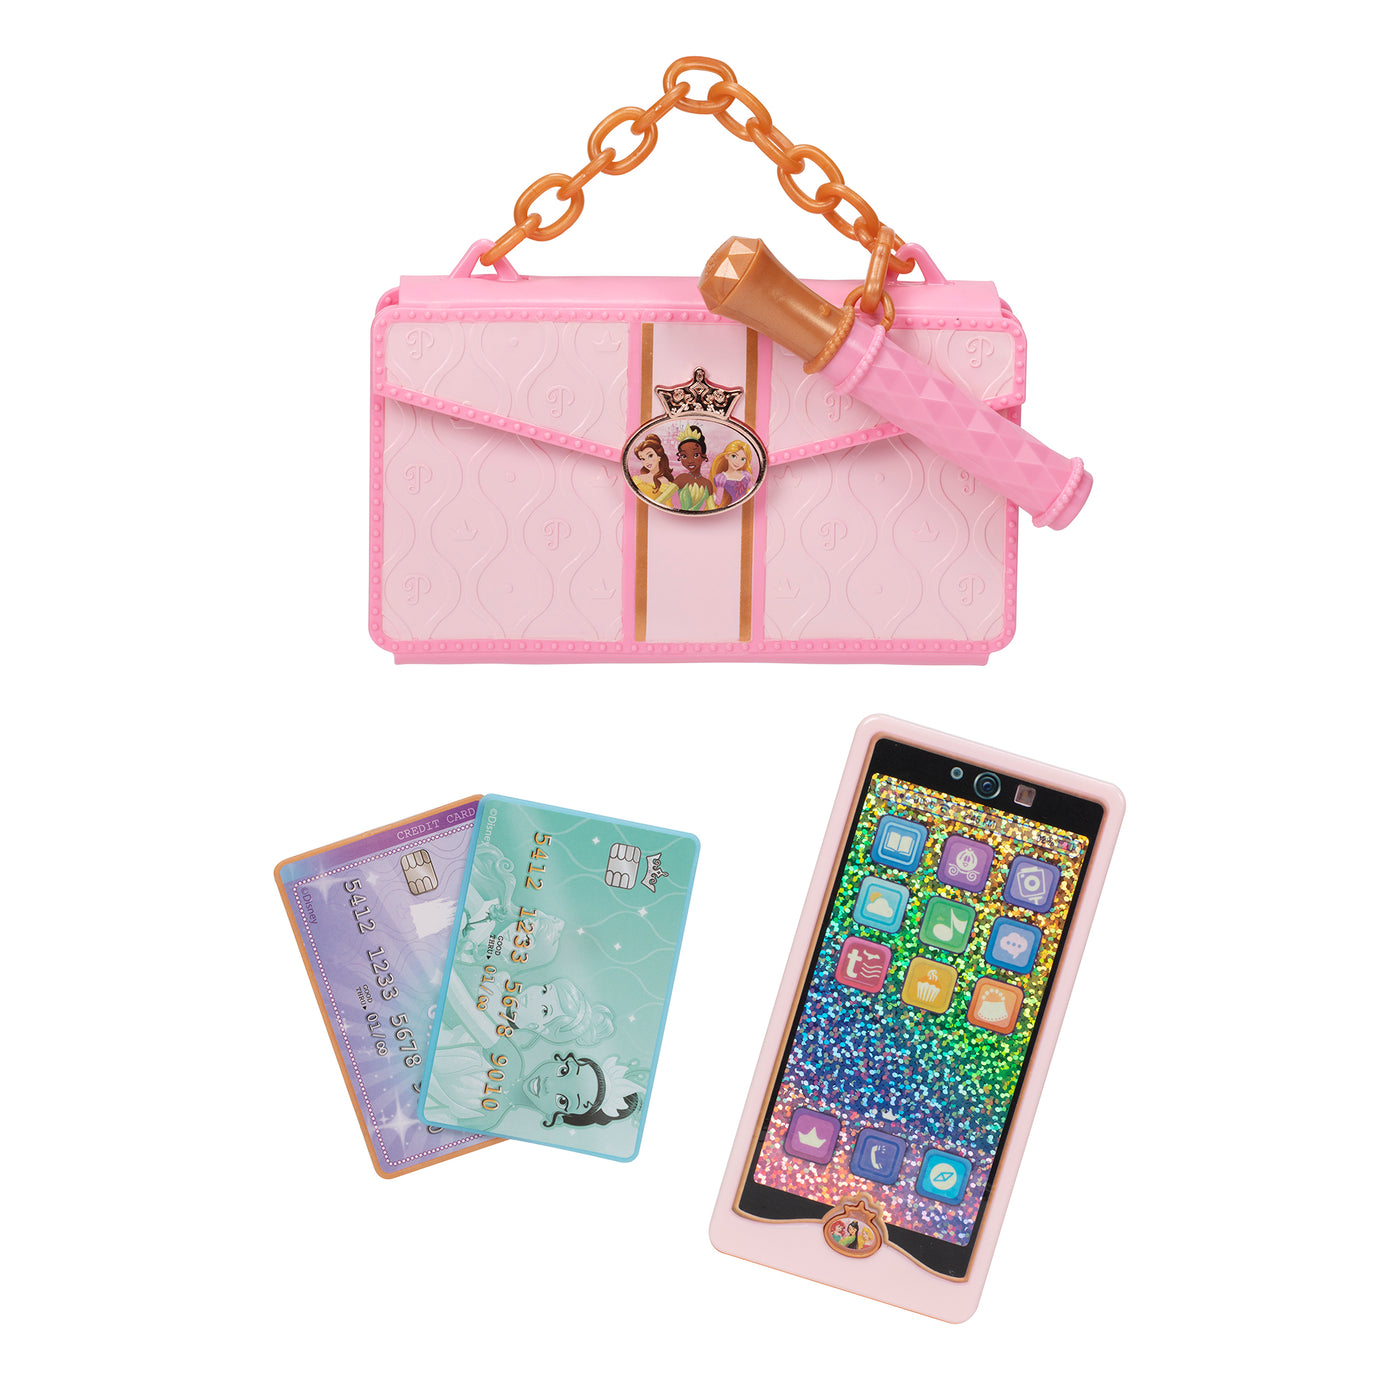 Disney Princess Style Collection Play Phone & Stylish Clutch